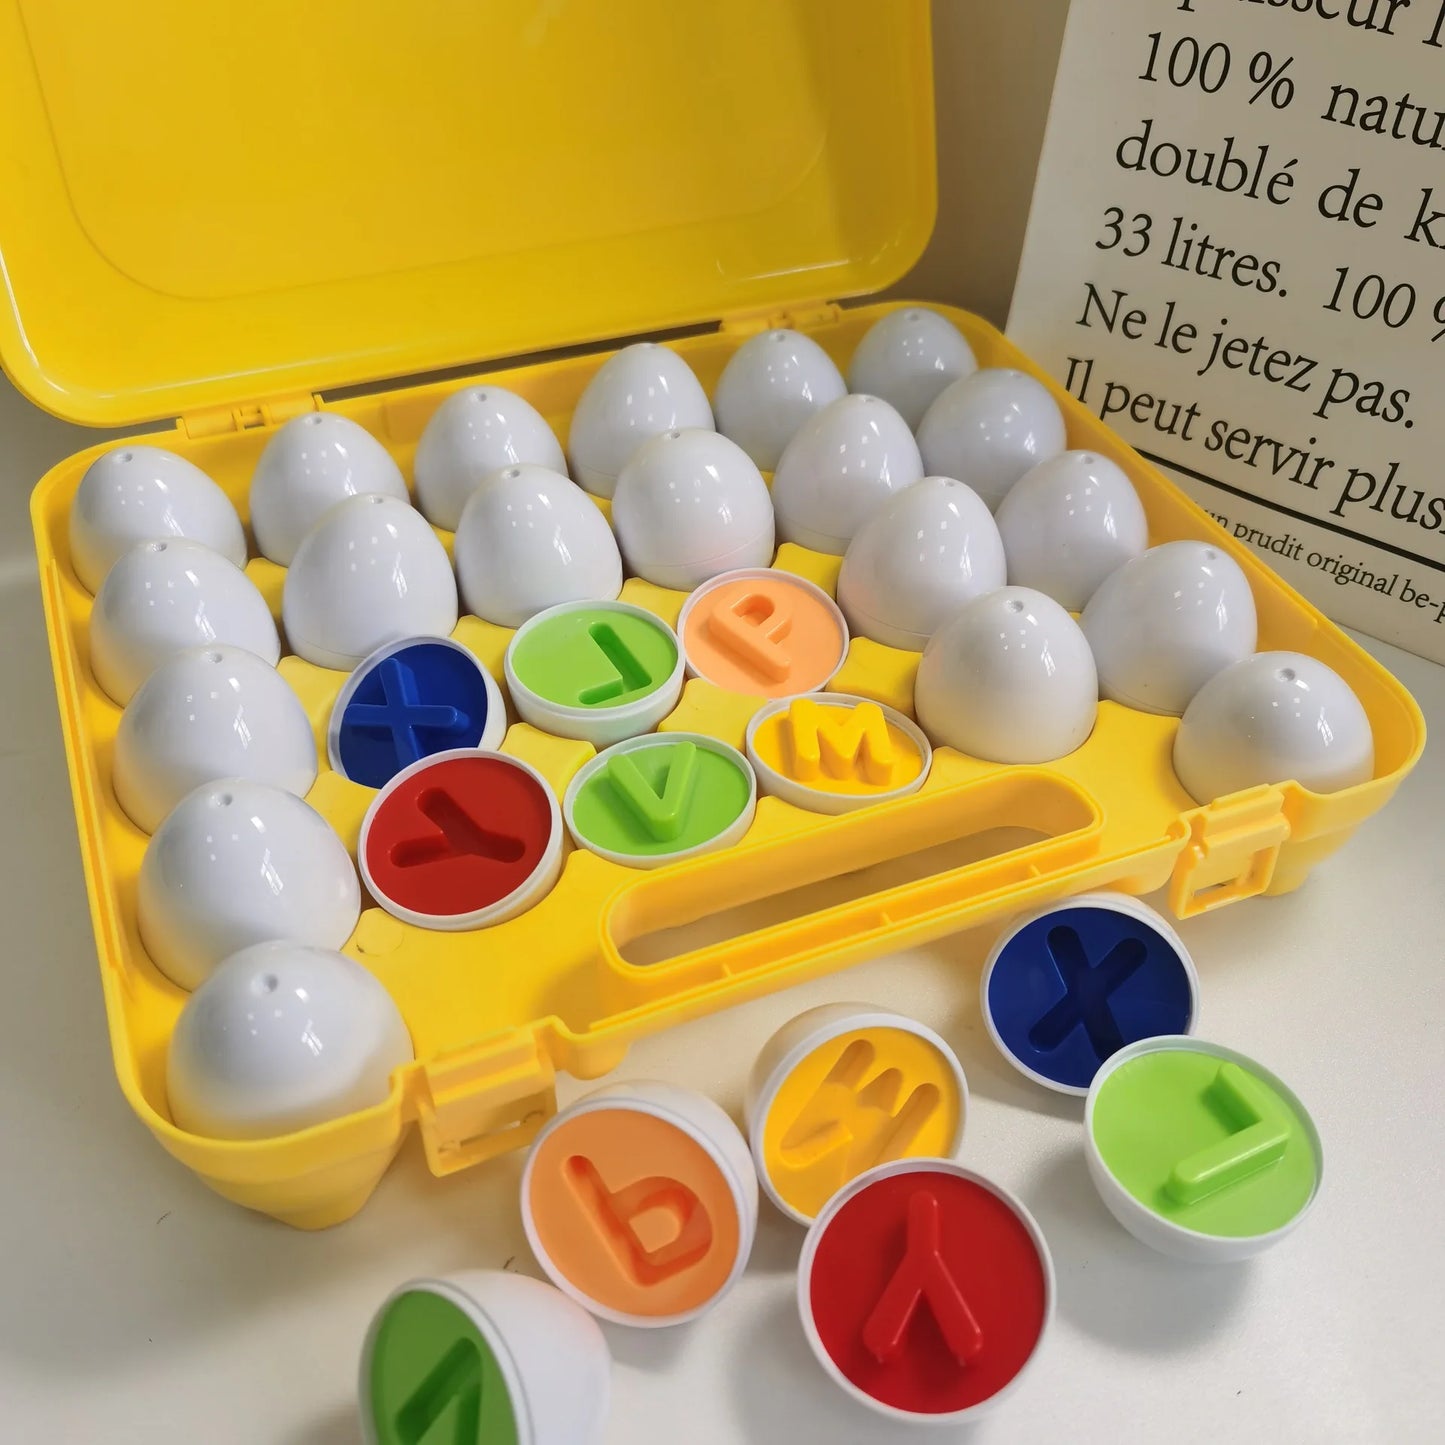 26 Pcs Set Of Colorful Matching Eggs For Kids